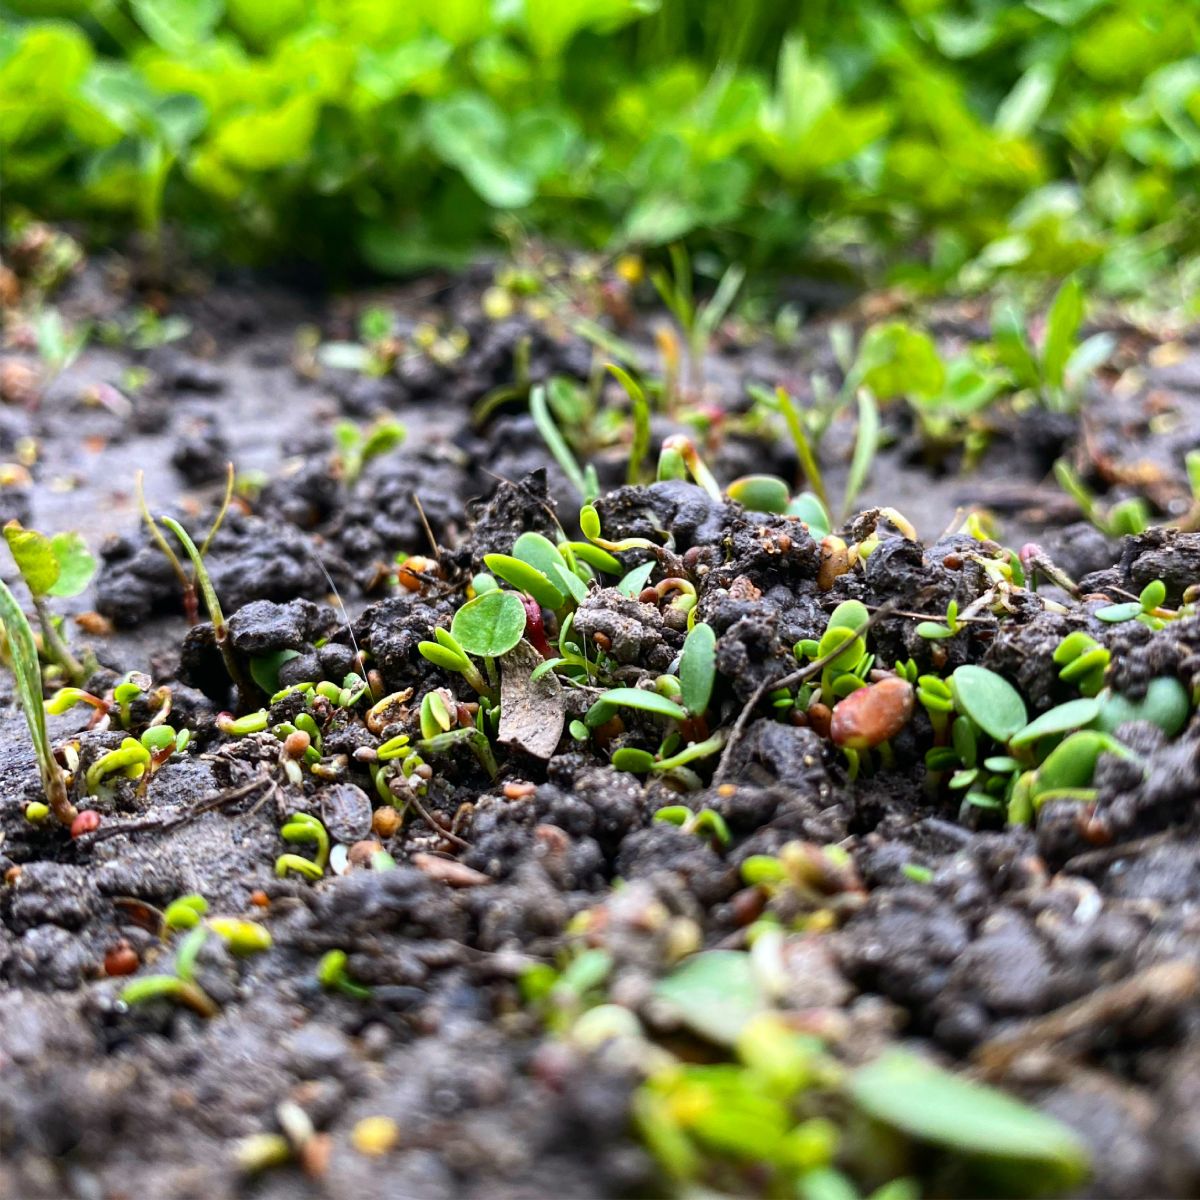 Why is soil health important and how can clovers help?